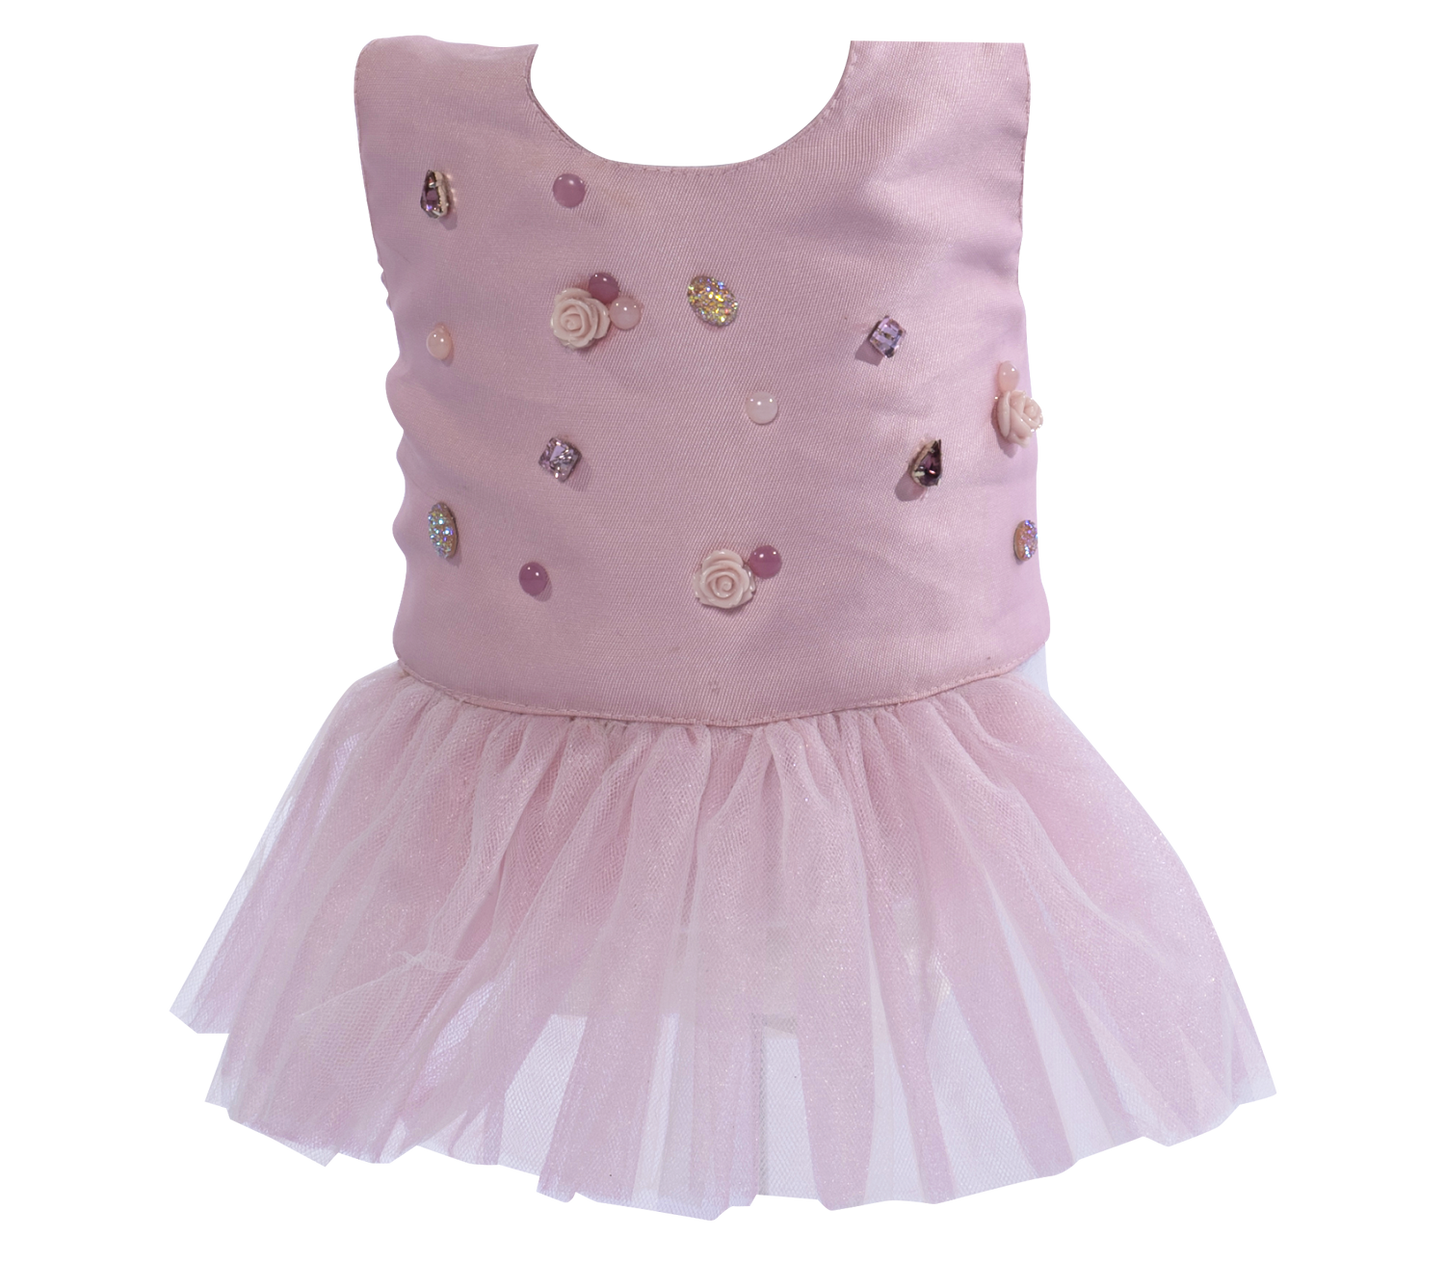 Pink pet dress with tulle ruffles